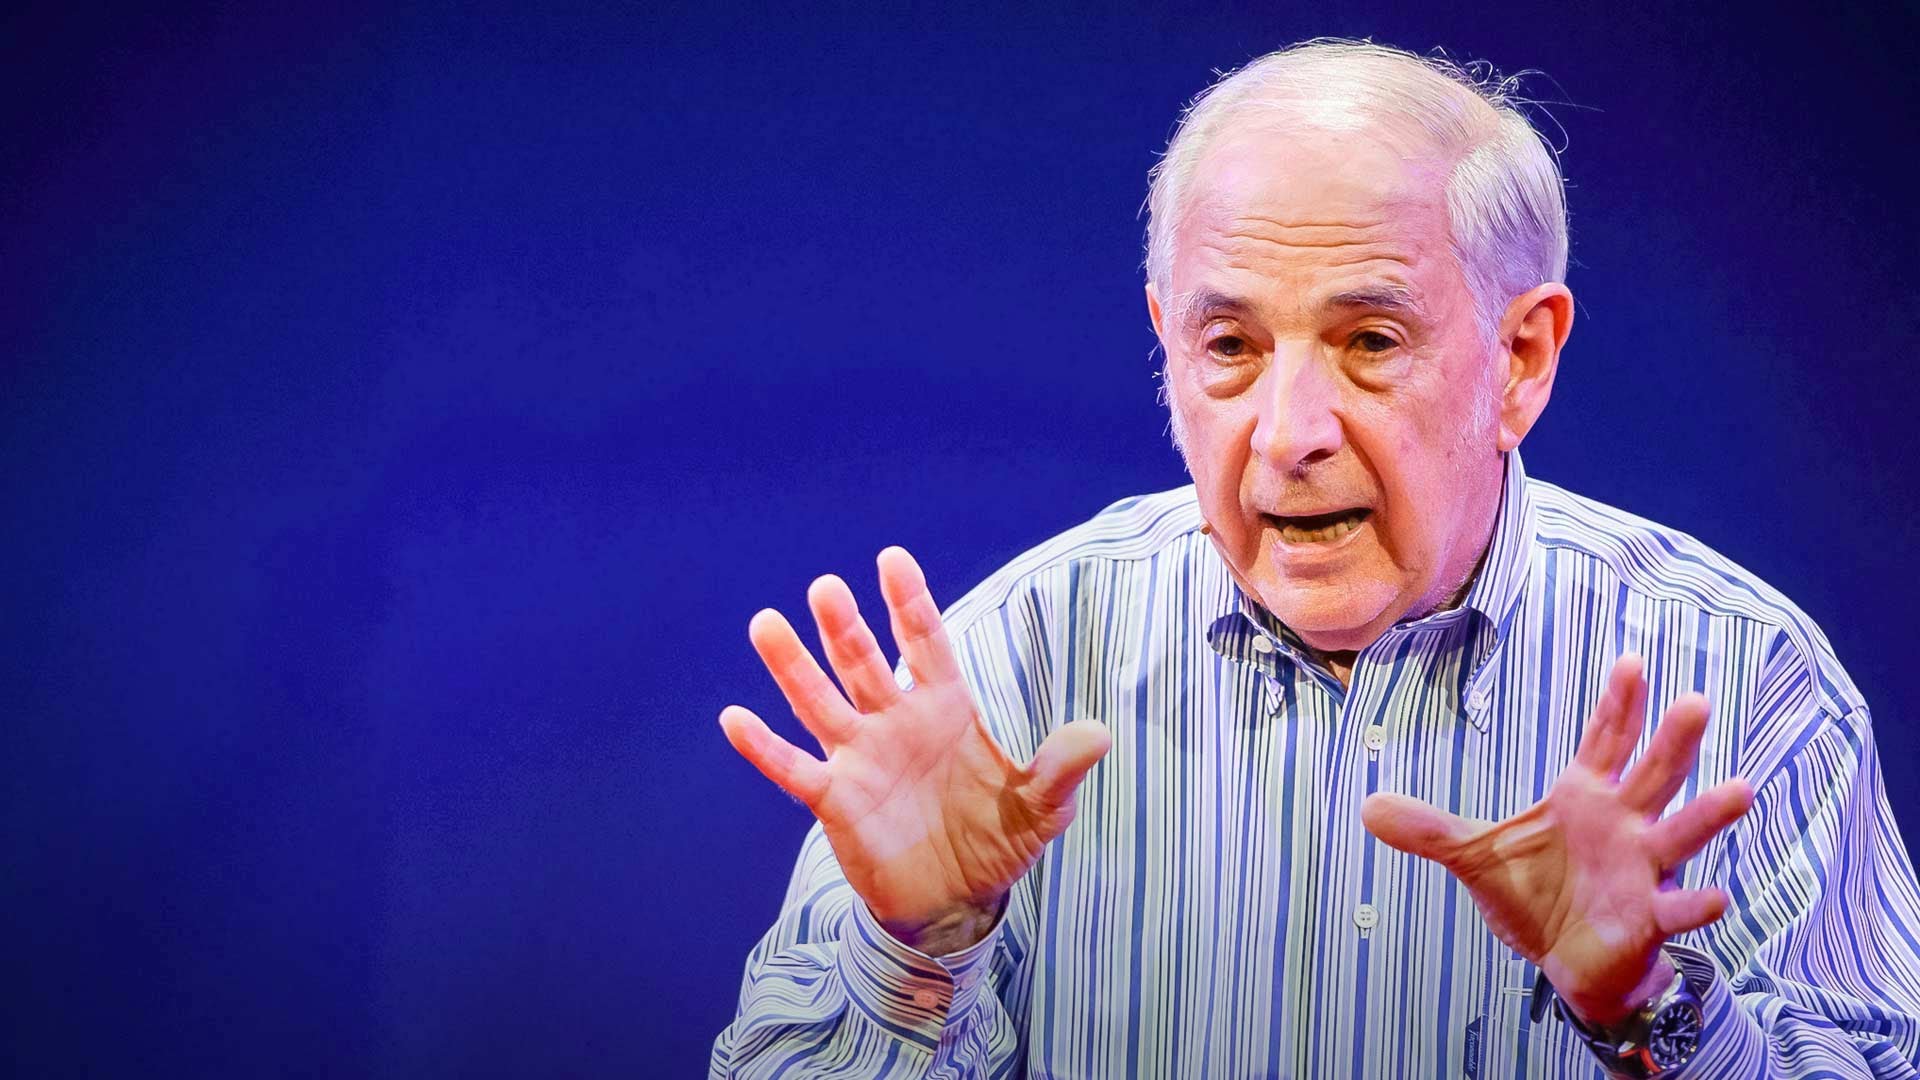 John Searle: Our shared condition — consciousness